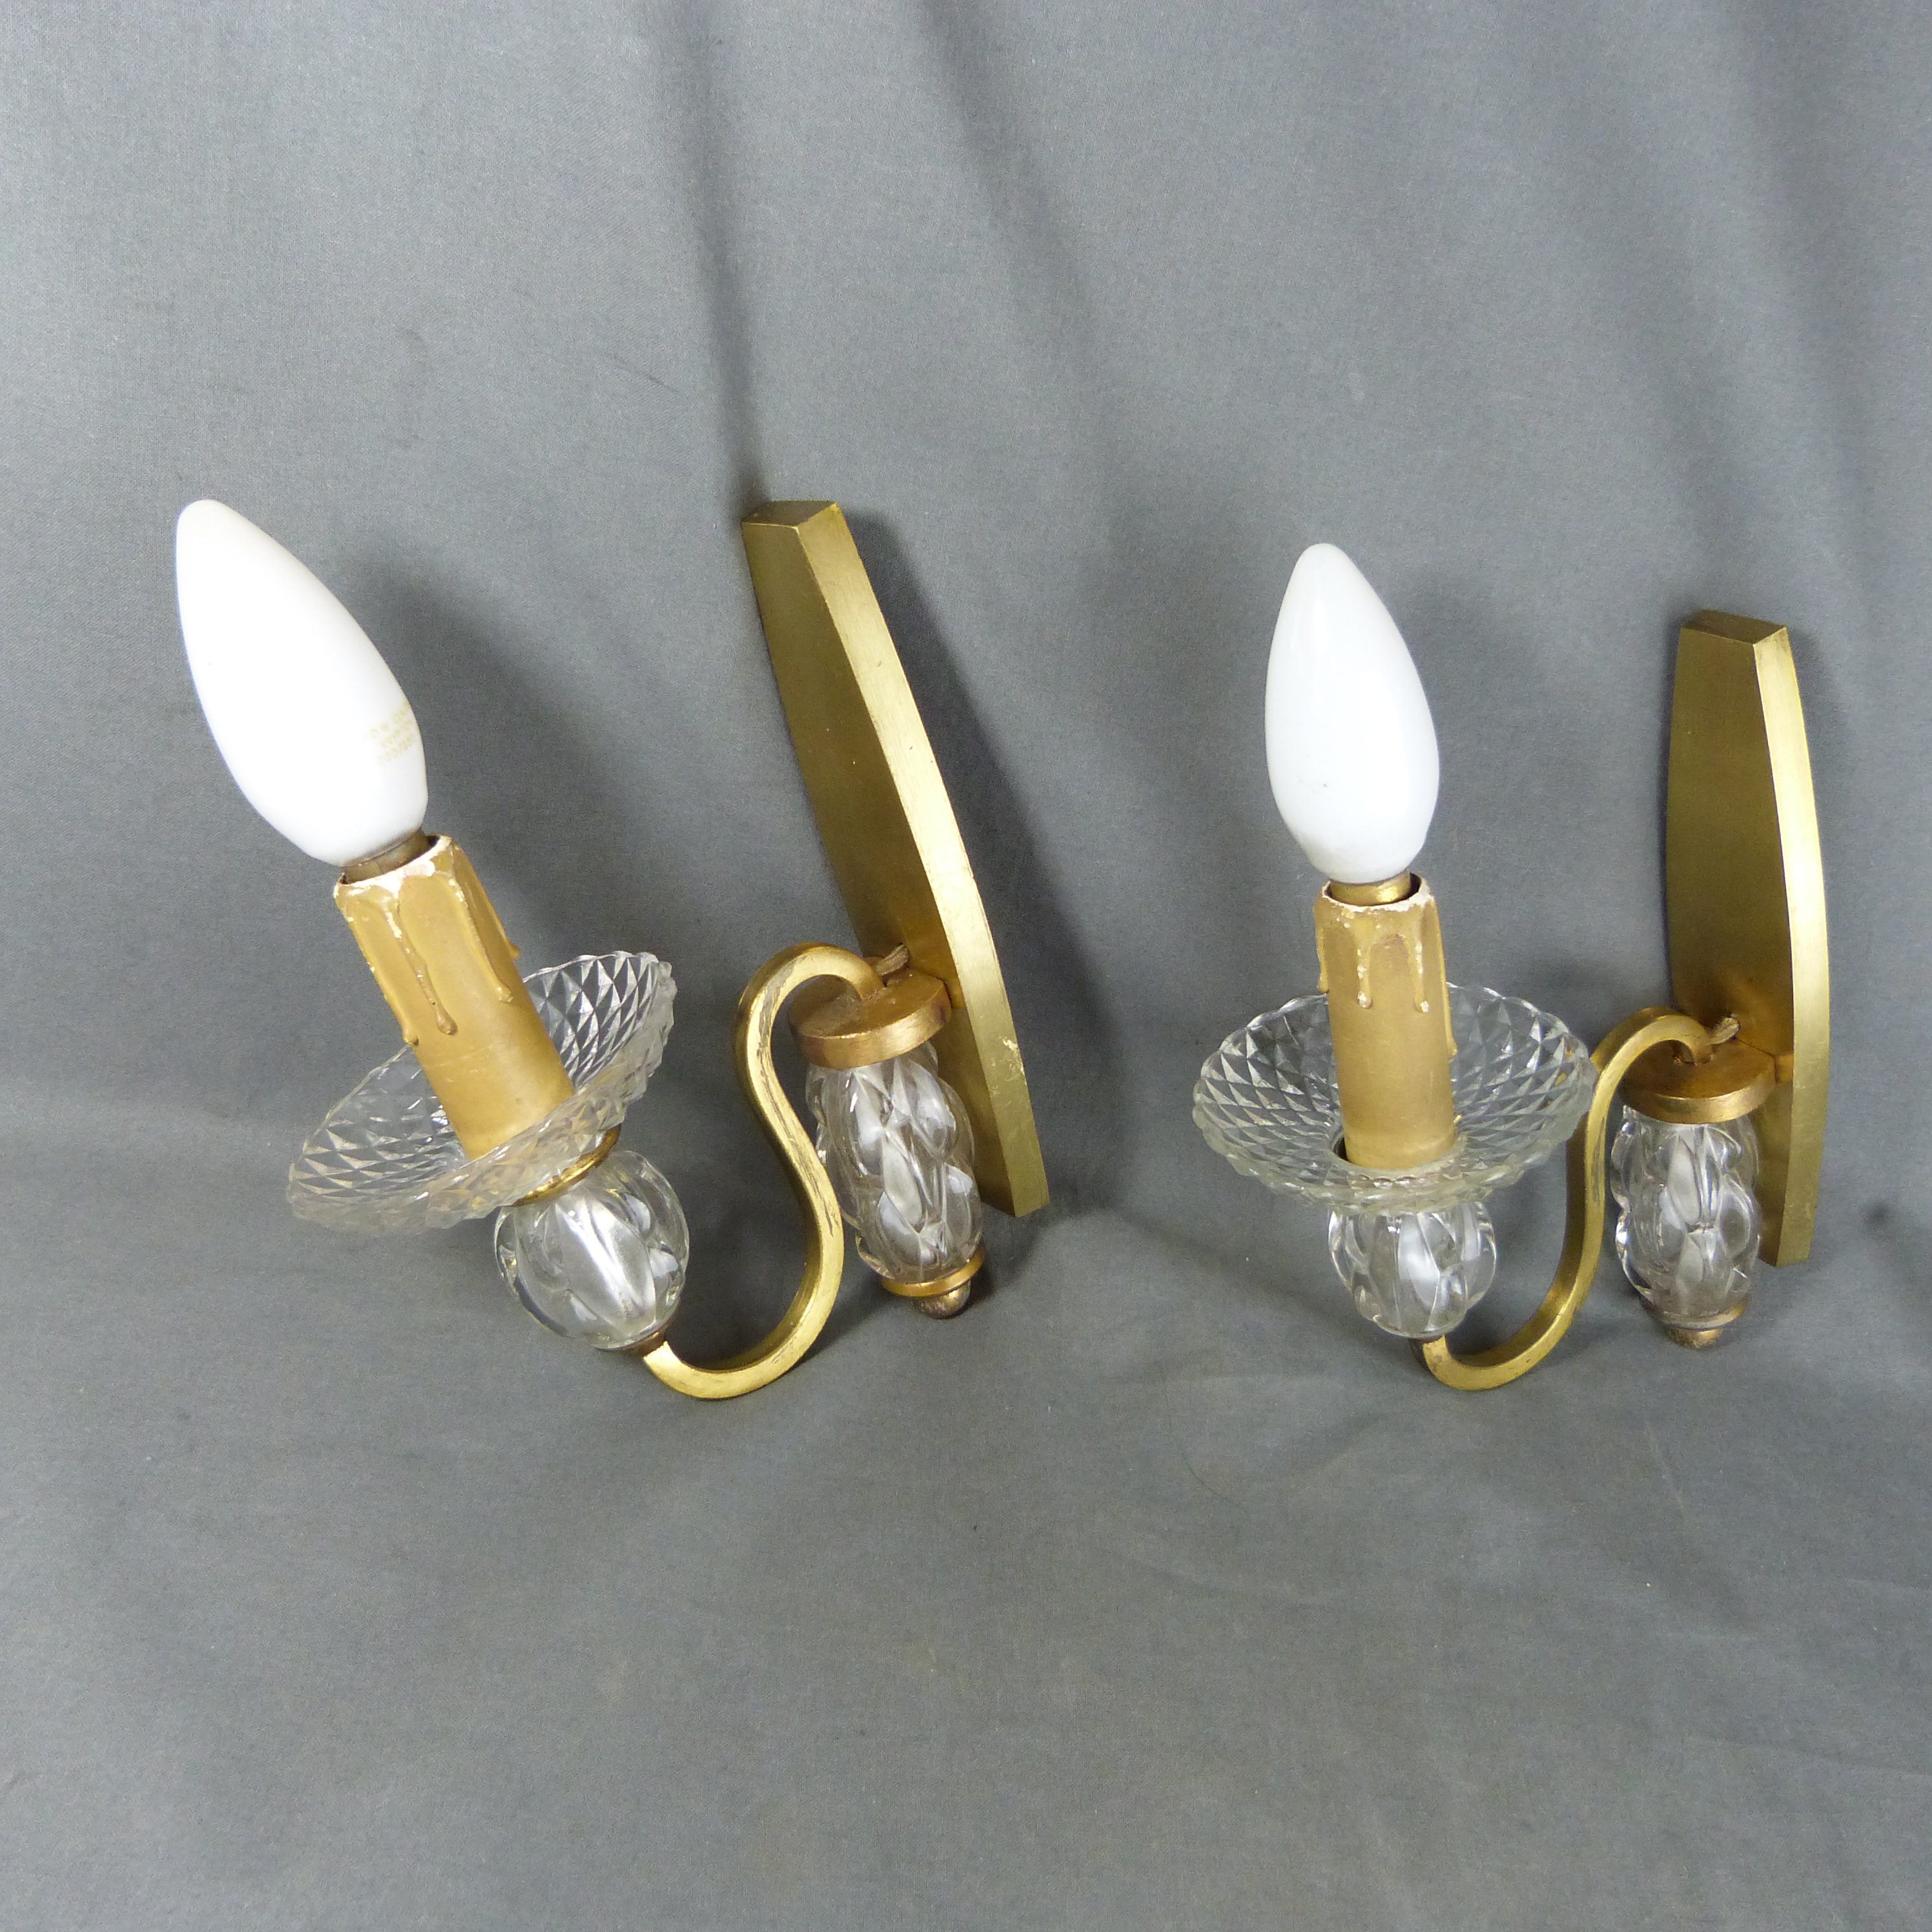 Pair Of French Vintage Brass & Glass Candle Wall Sconces Lights